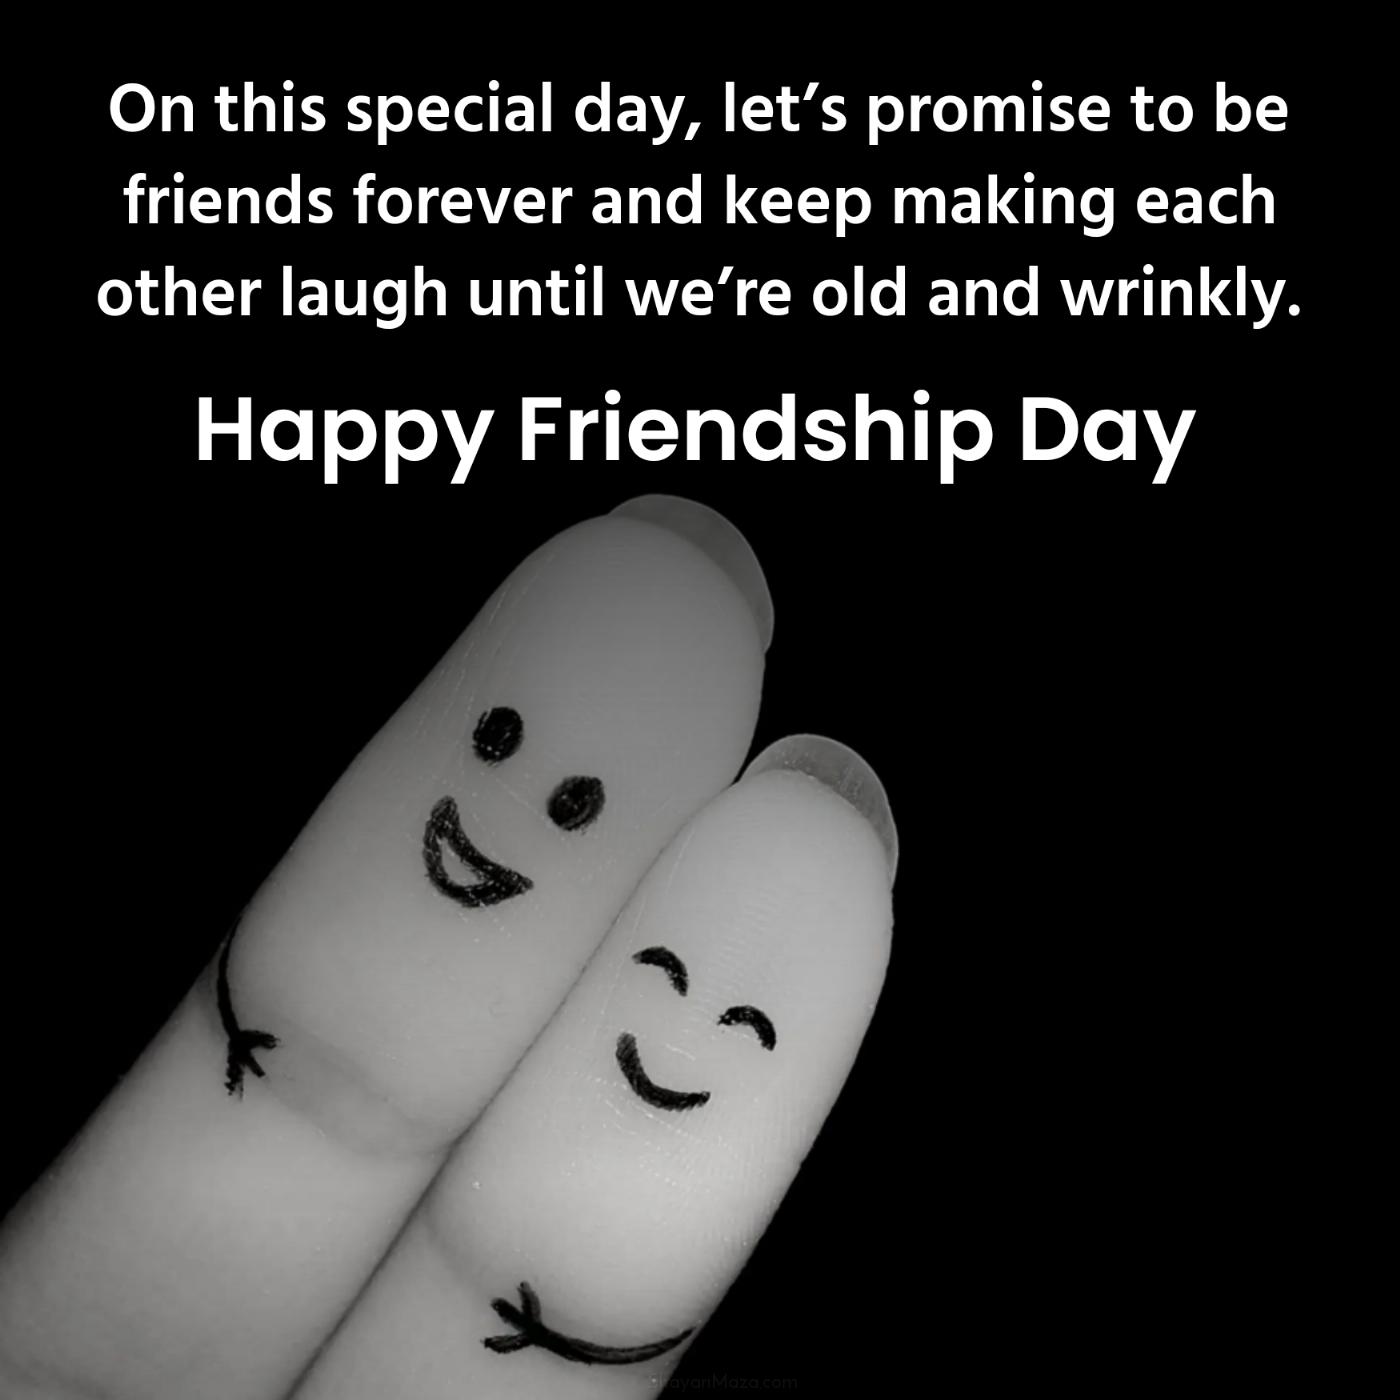 On this special day lets promise to be friends forever